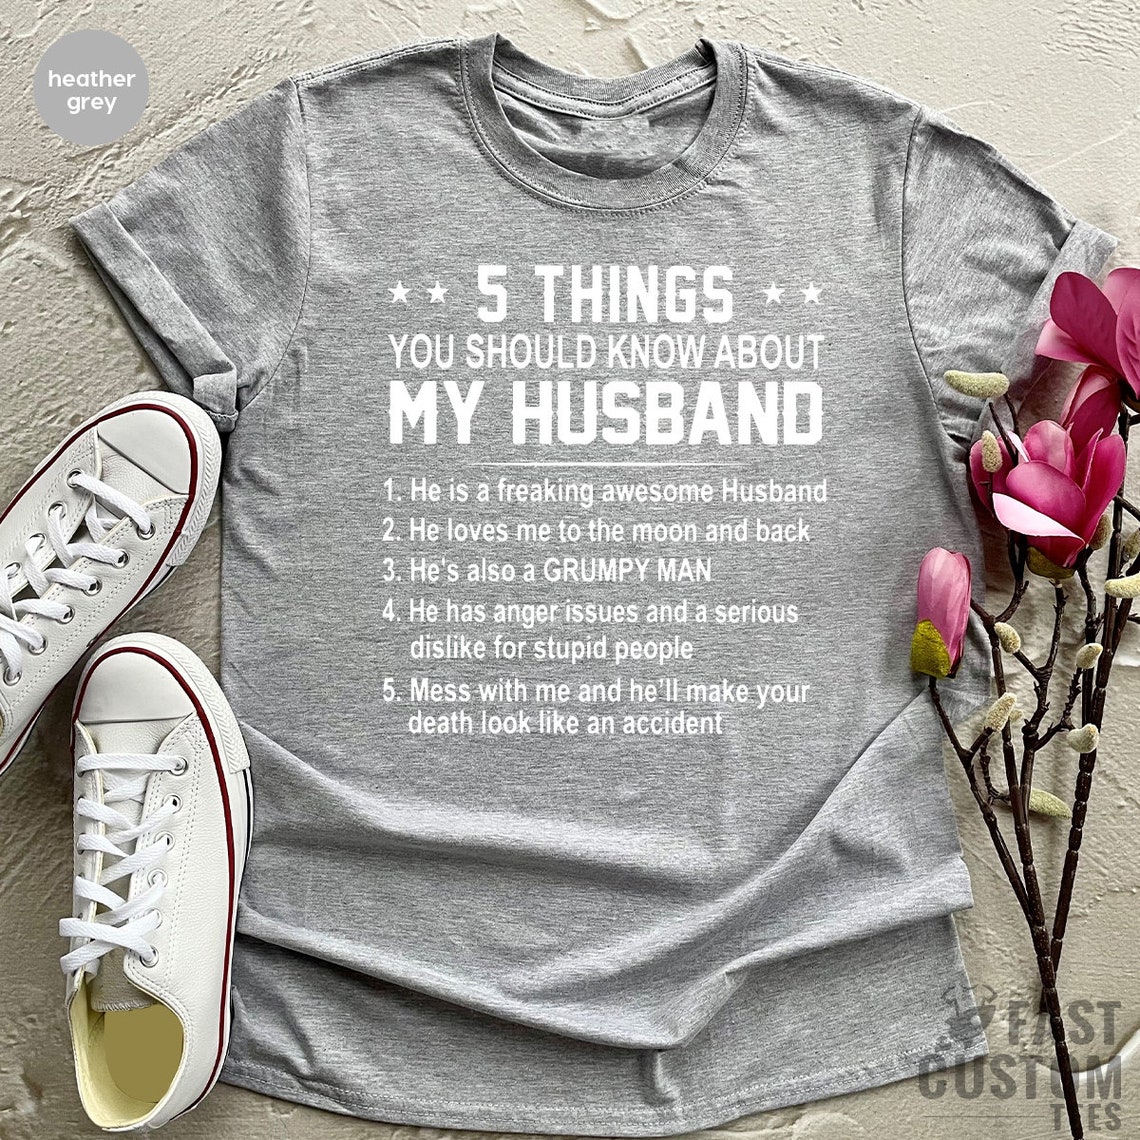 Funny Wife Shirt 5 Things You Should Know About My Husband T - Etsy